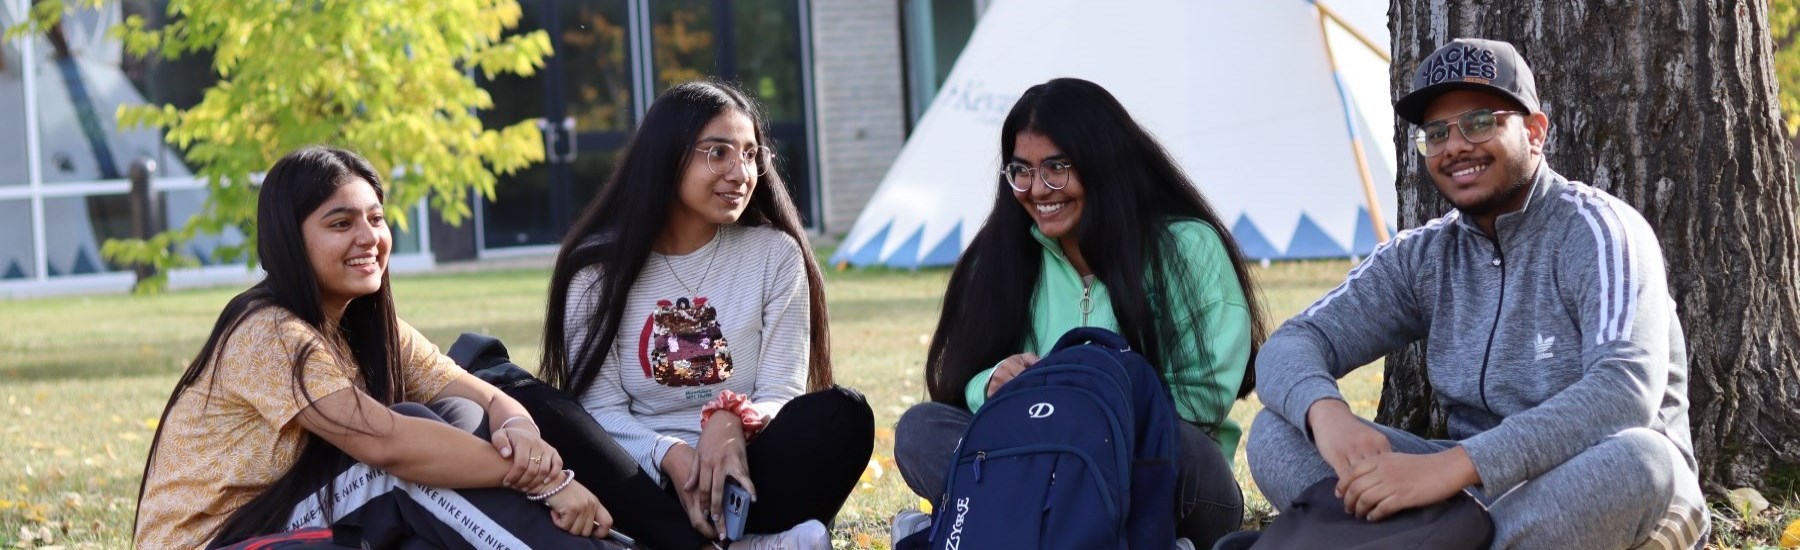 students smiling in park